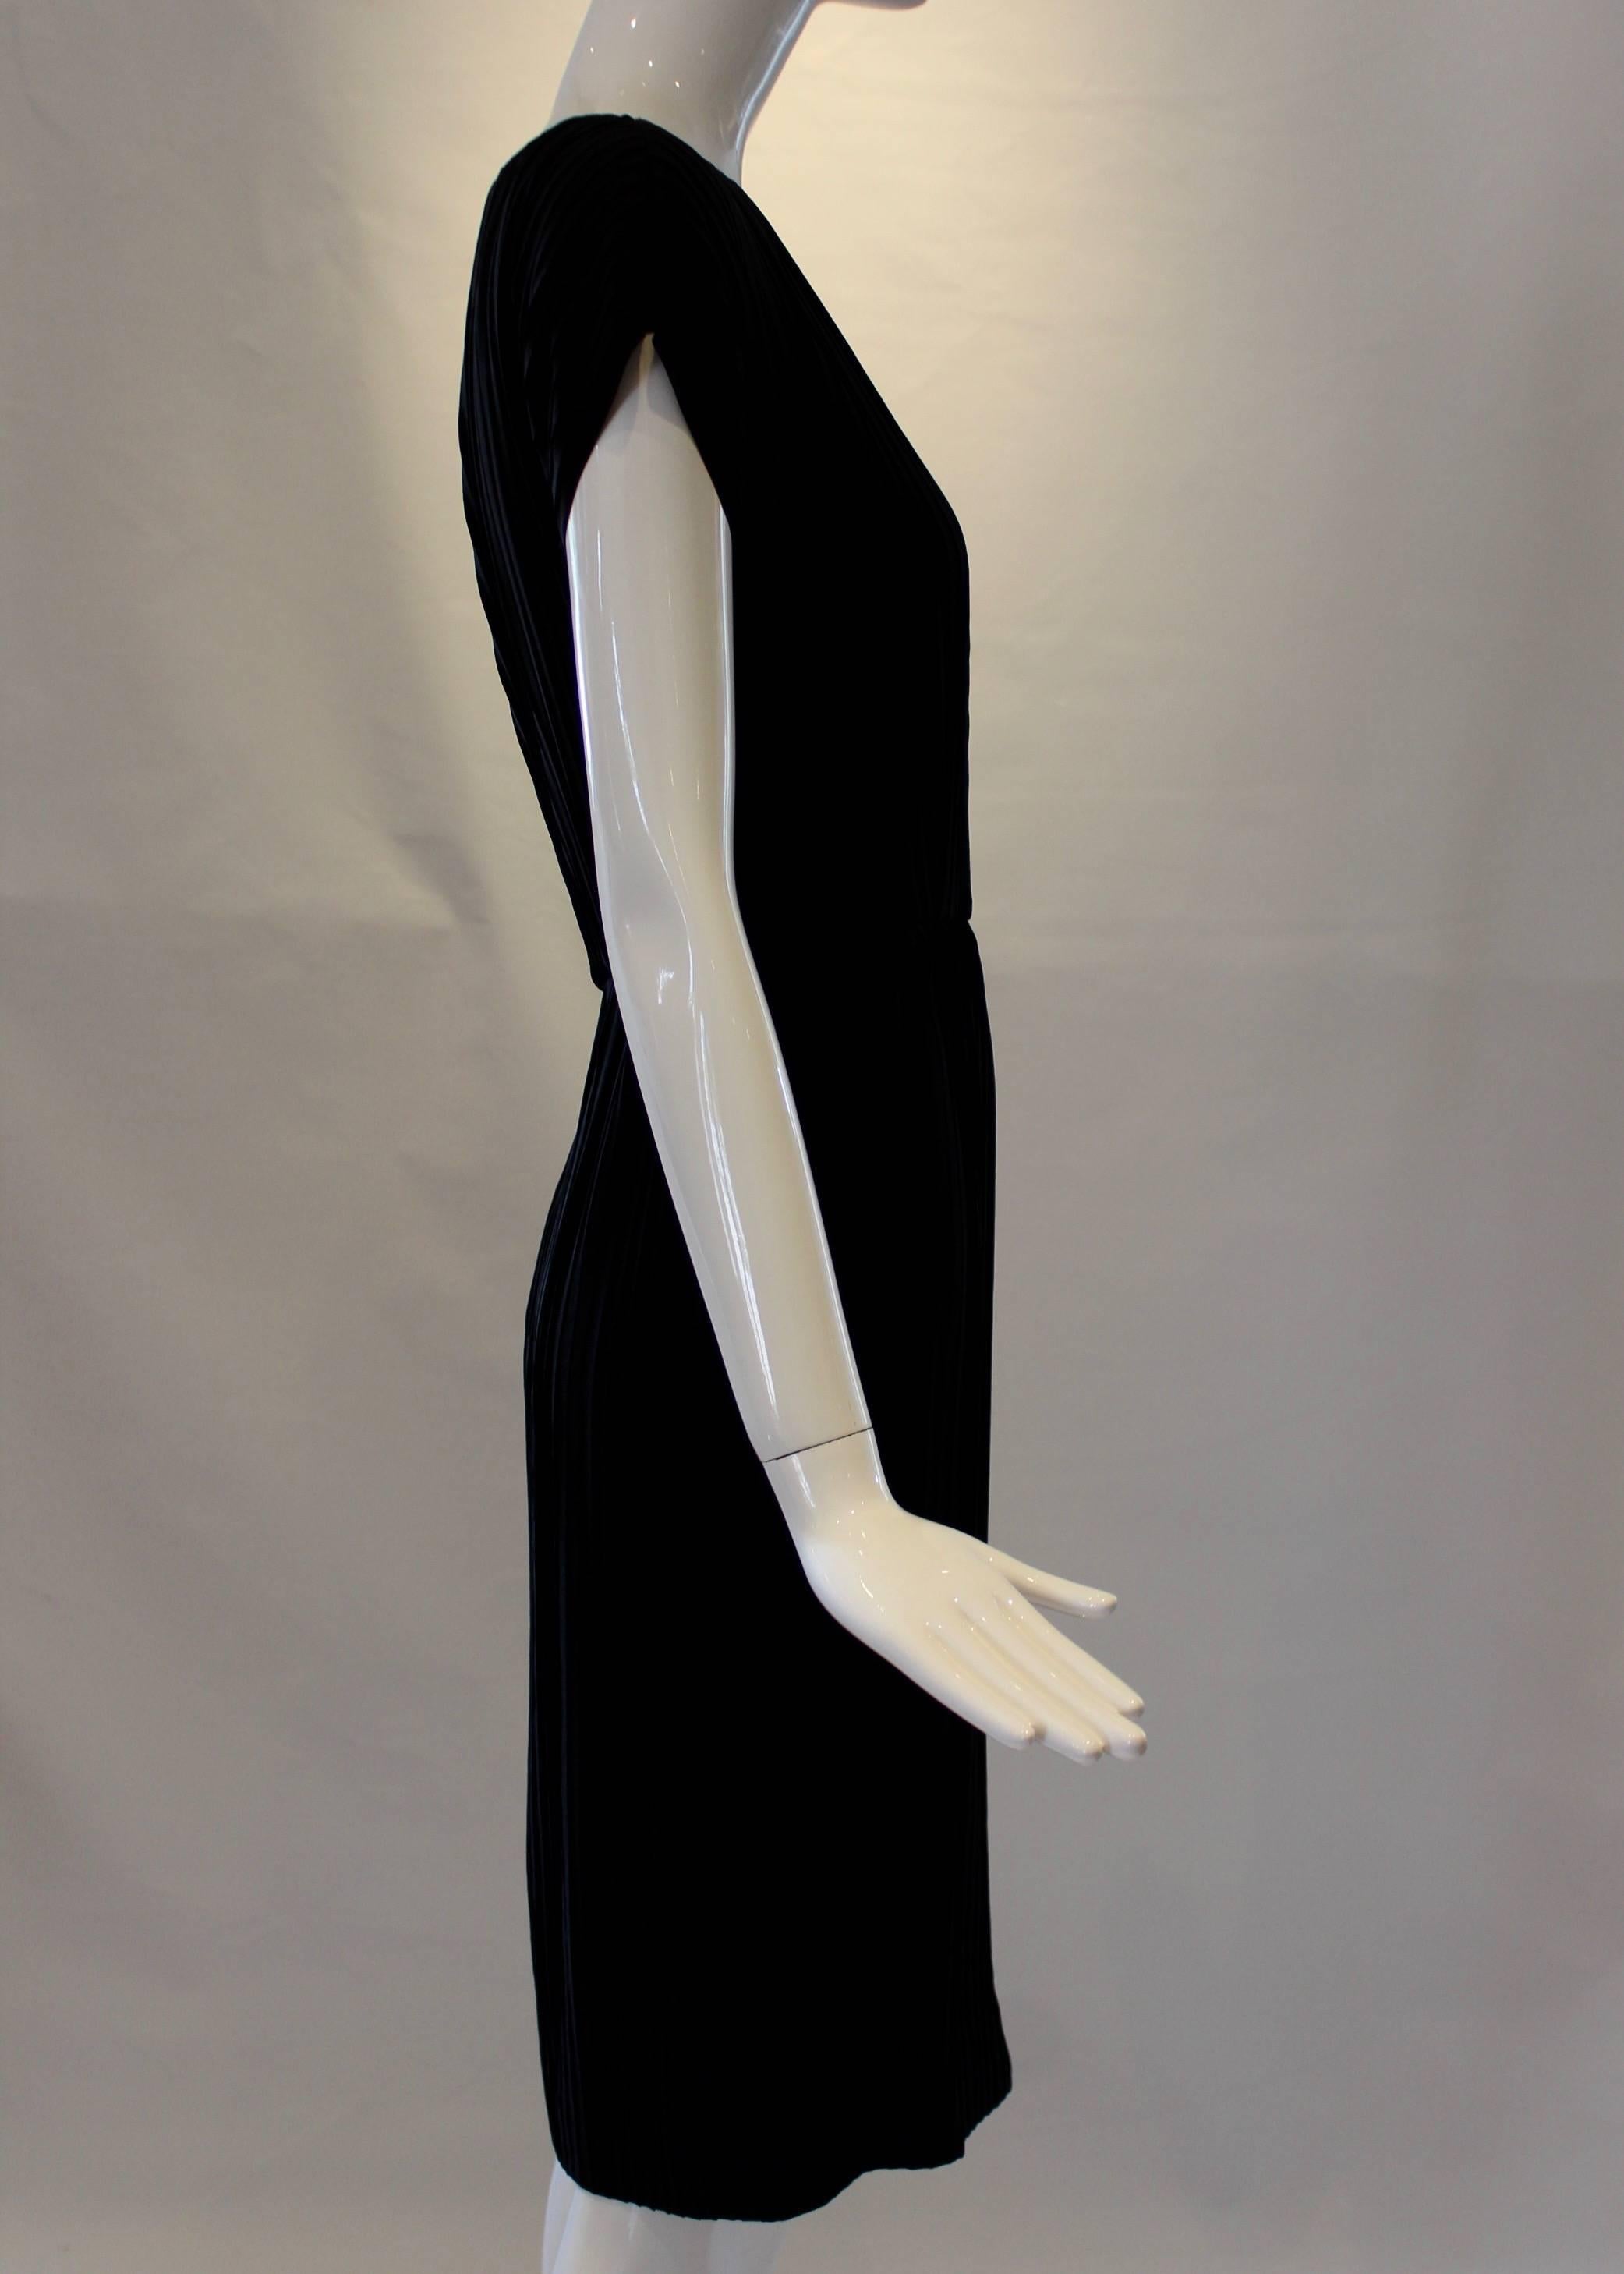 Akris Pleated Black Dress In Excellent Condition For Sale In Houston, TX